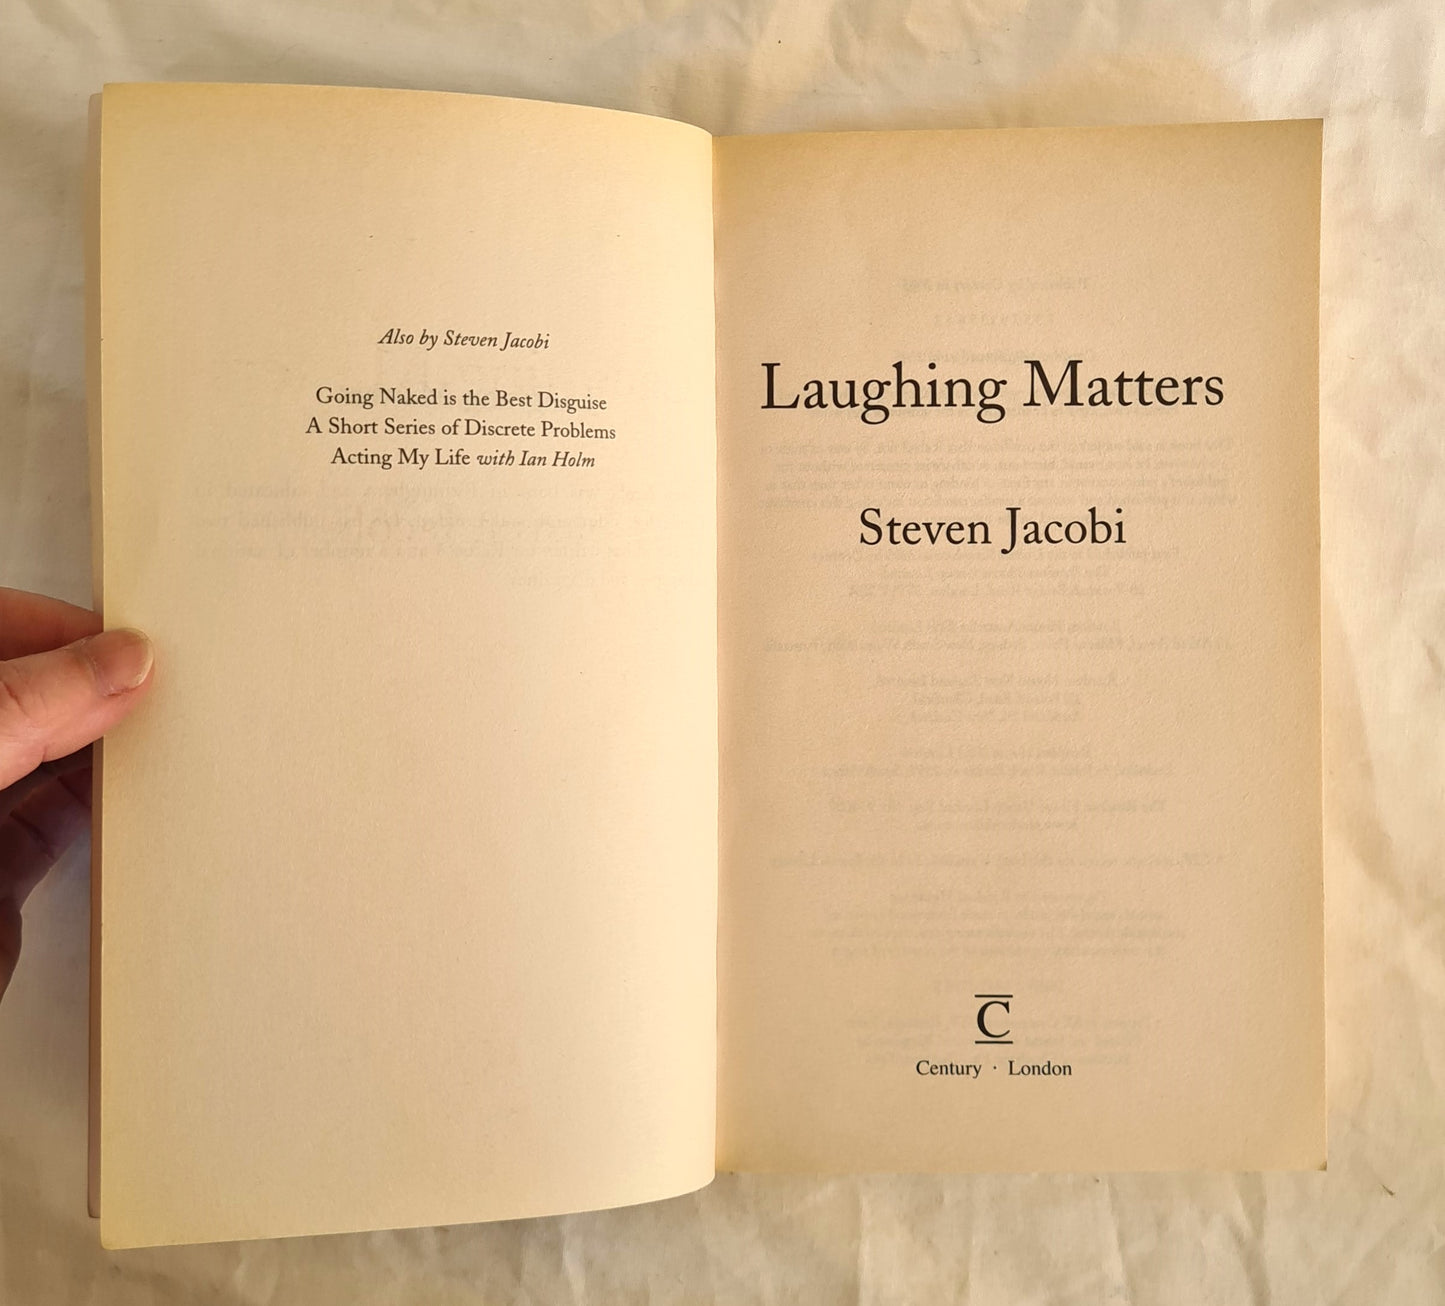 Laughing Matters by Steven Jacobi